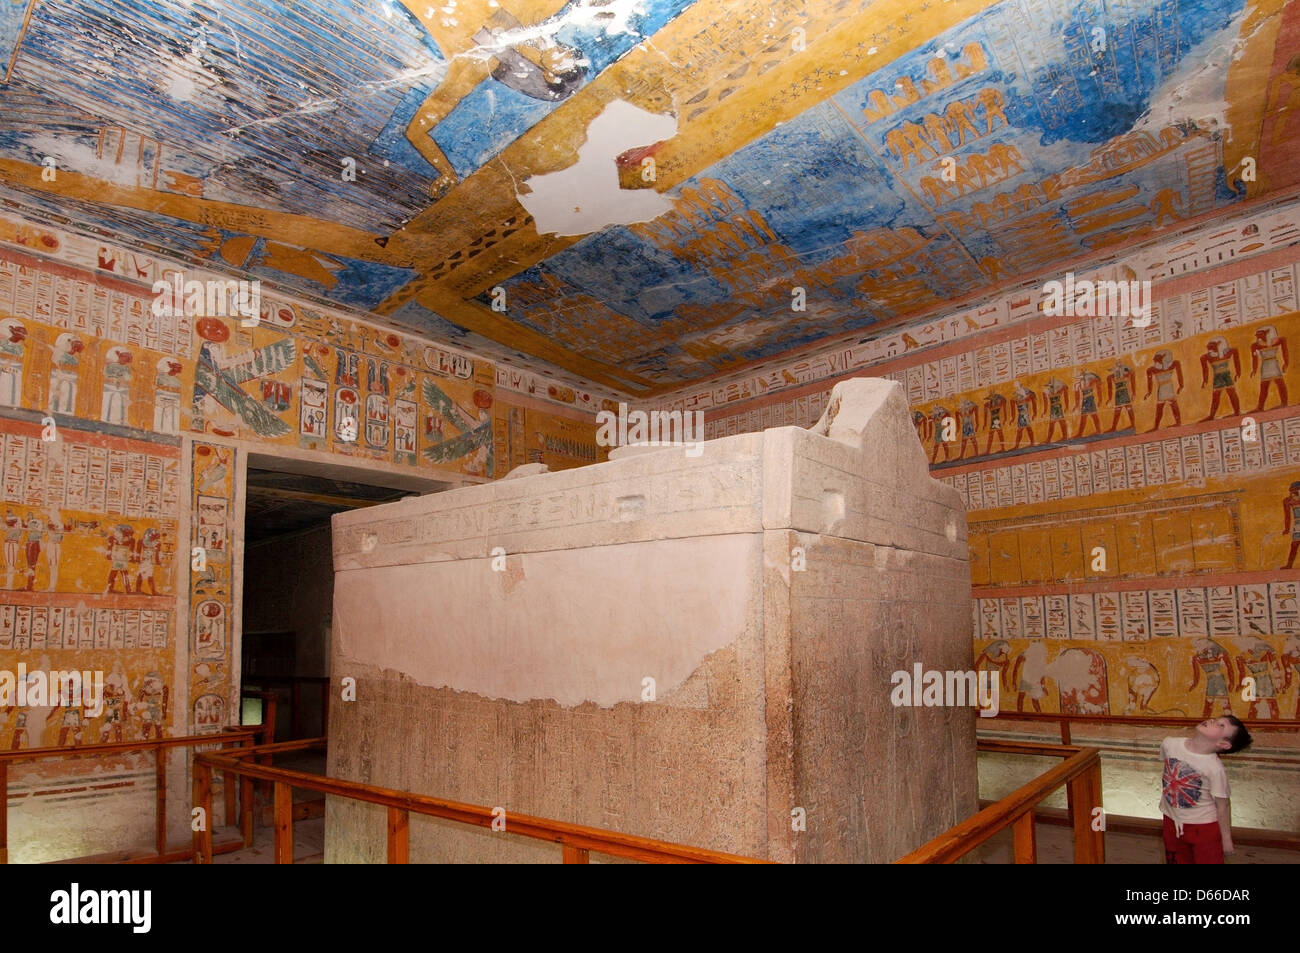 The Interior of Ramesses IV's KV2 royal tomb, East Valley of the Kings, Luxor (Thebes), Egypt, Africa  Stock Photo